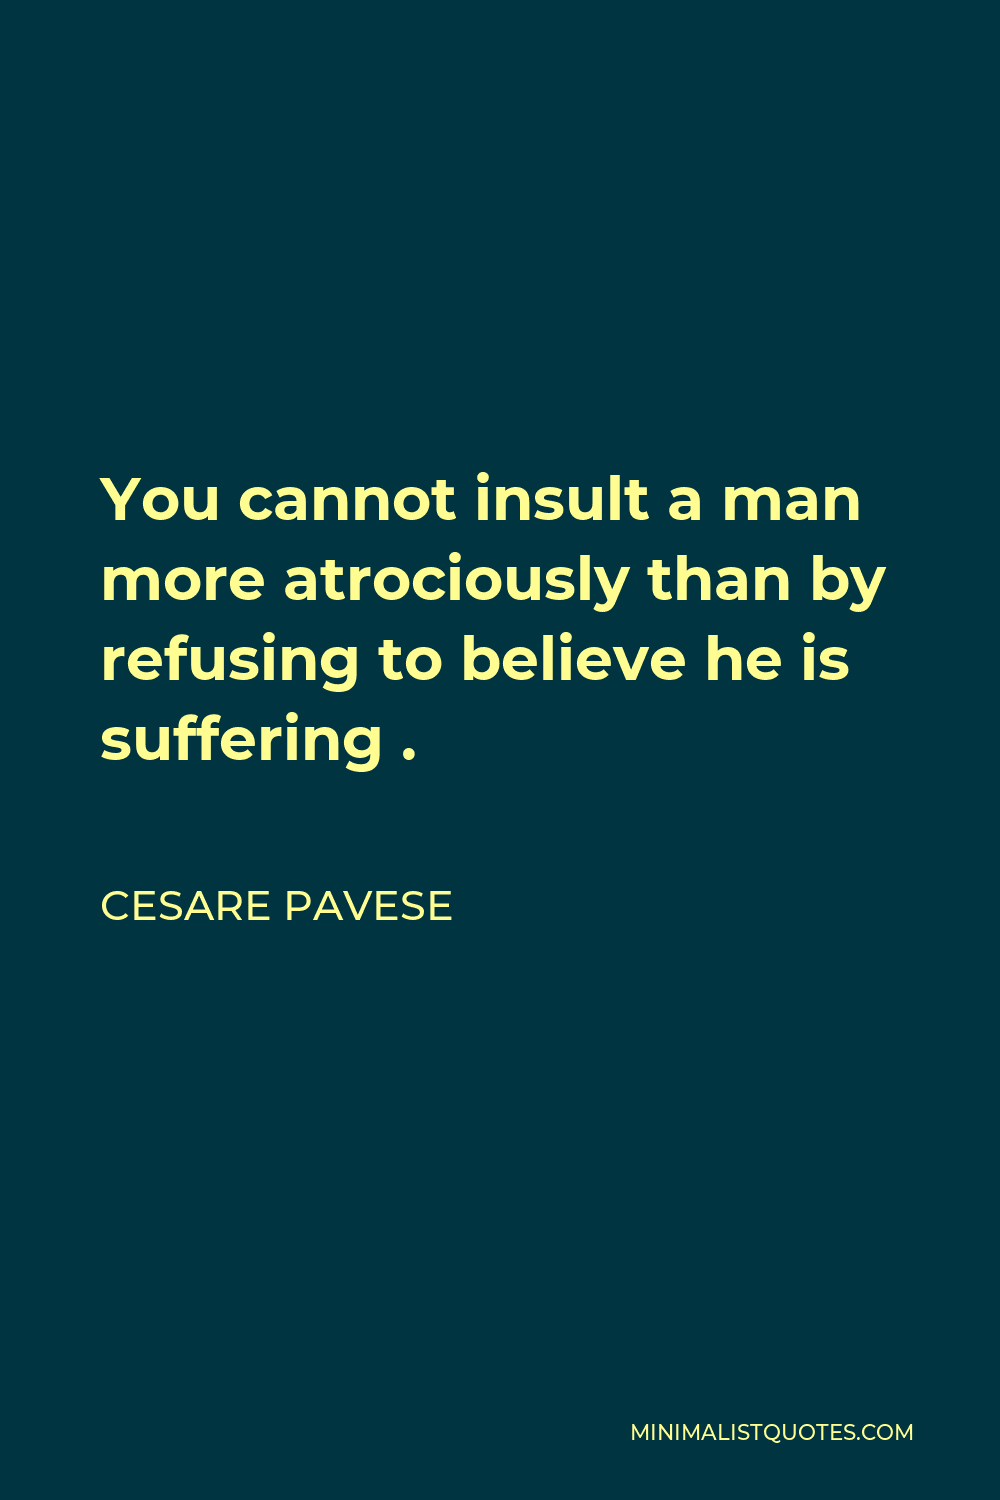 Cesare Pavese Quote - You cannot insult a man more atrociously than by refusing to believe he is suffering .